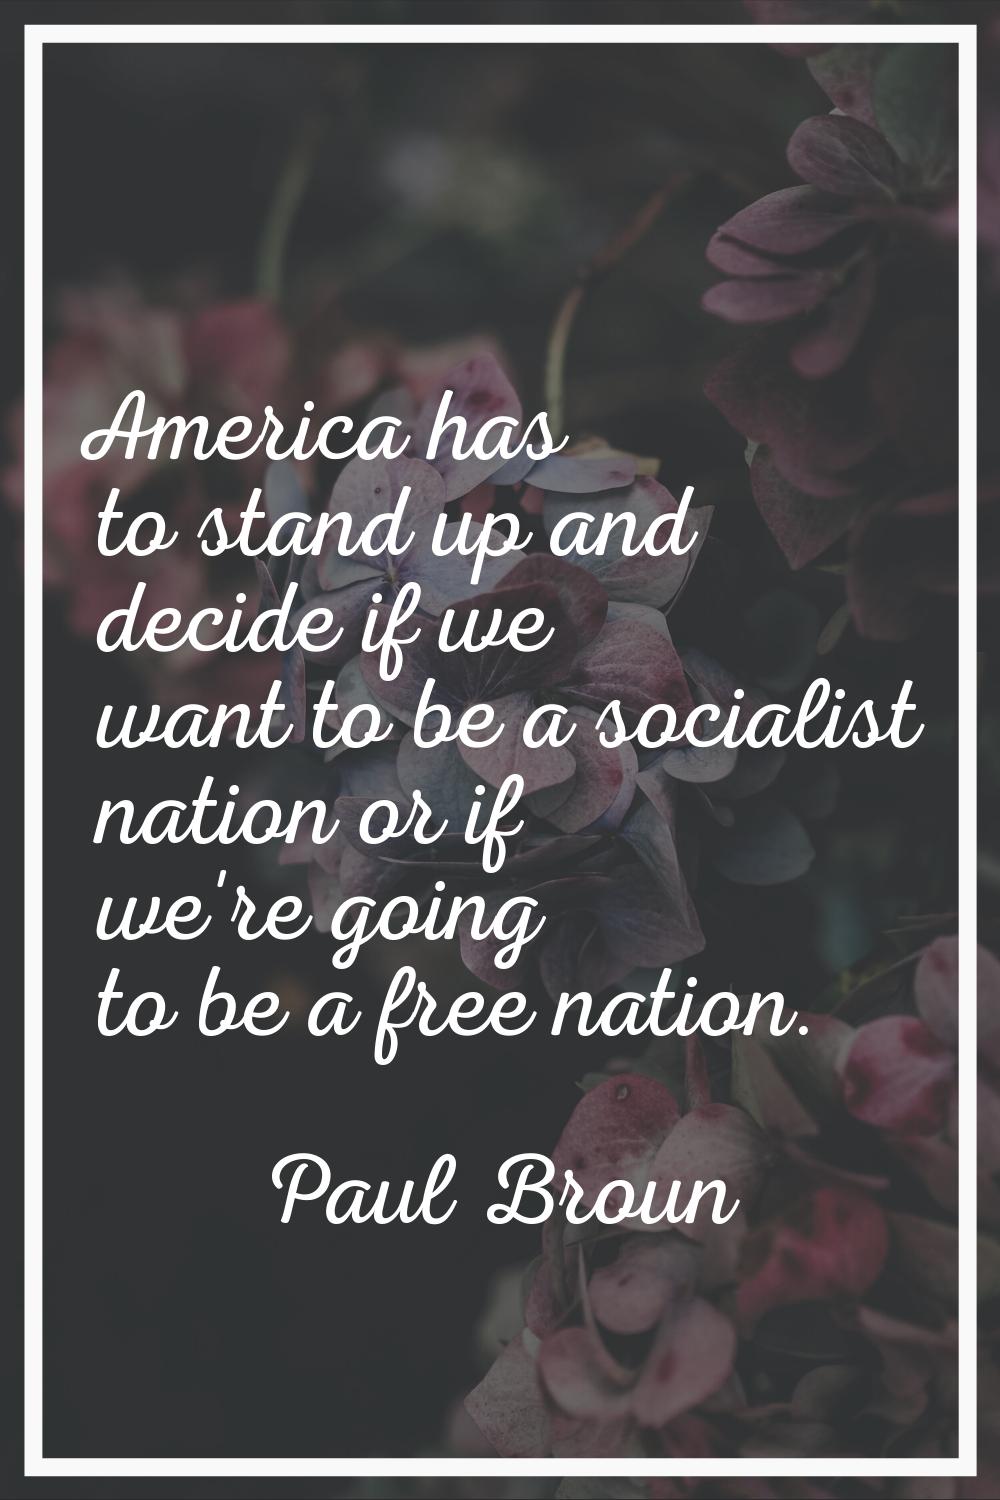 America has to stand up and decide if we want to be a socialist nation or if we're going to be a fr